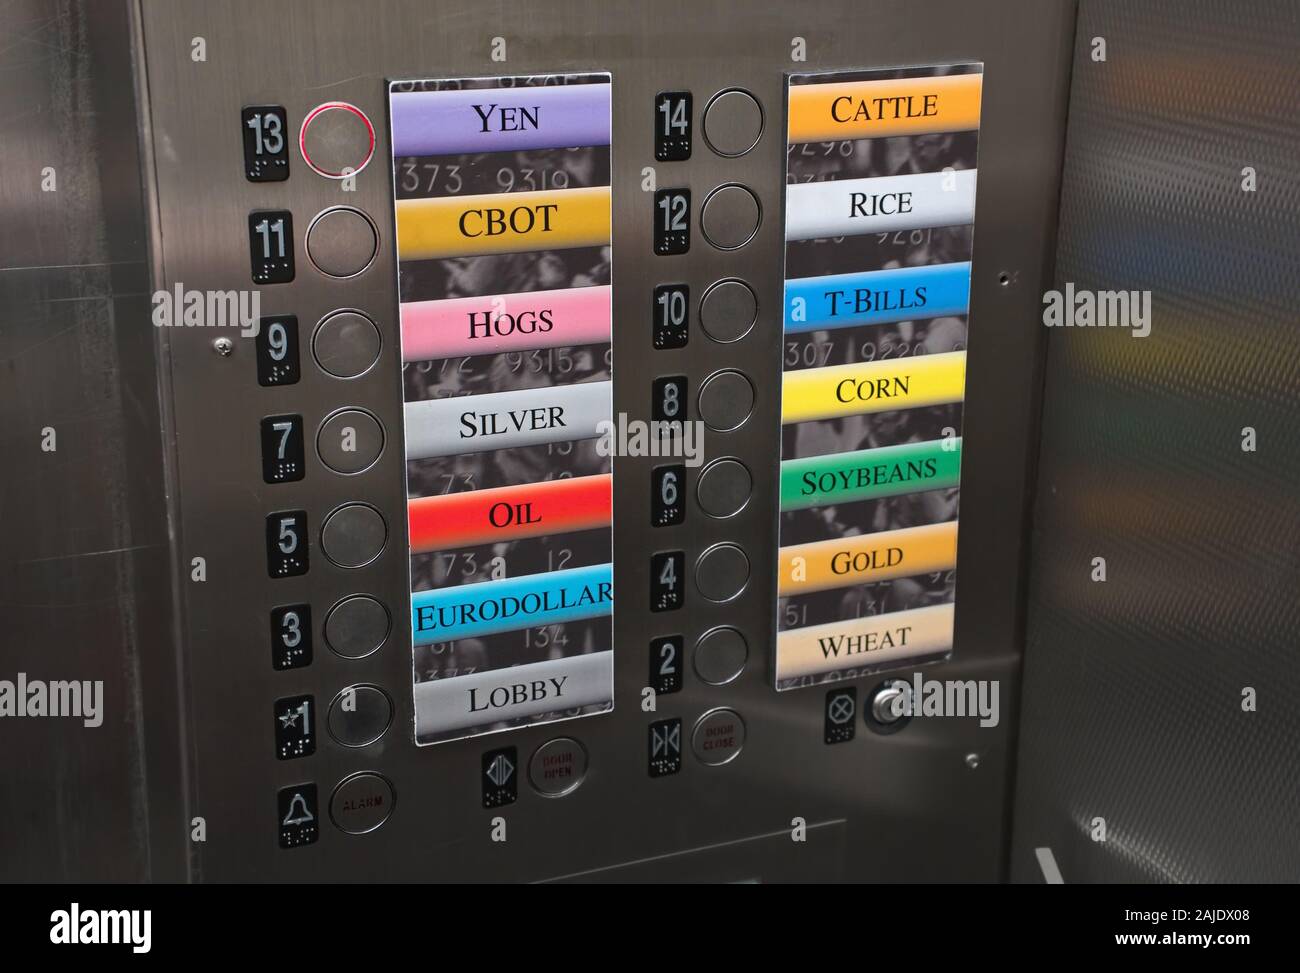 Chicago, IL USA. Aug 2018. An interesting elevator control panel with stock market commodities representing each building floor. Stock Photo